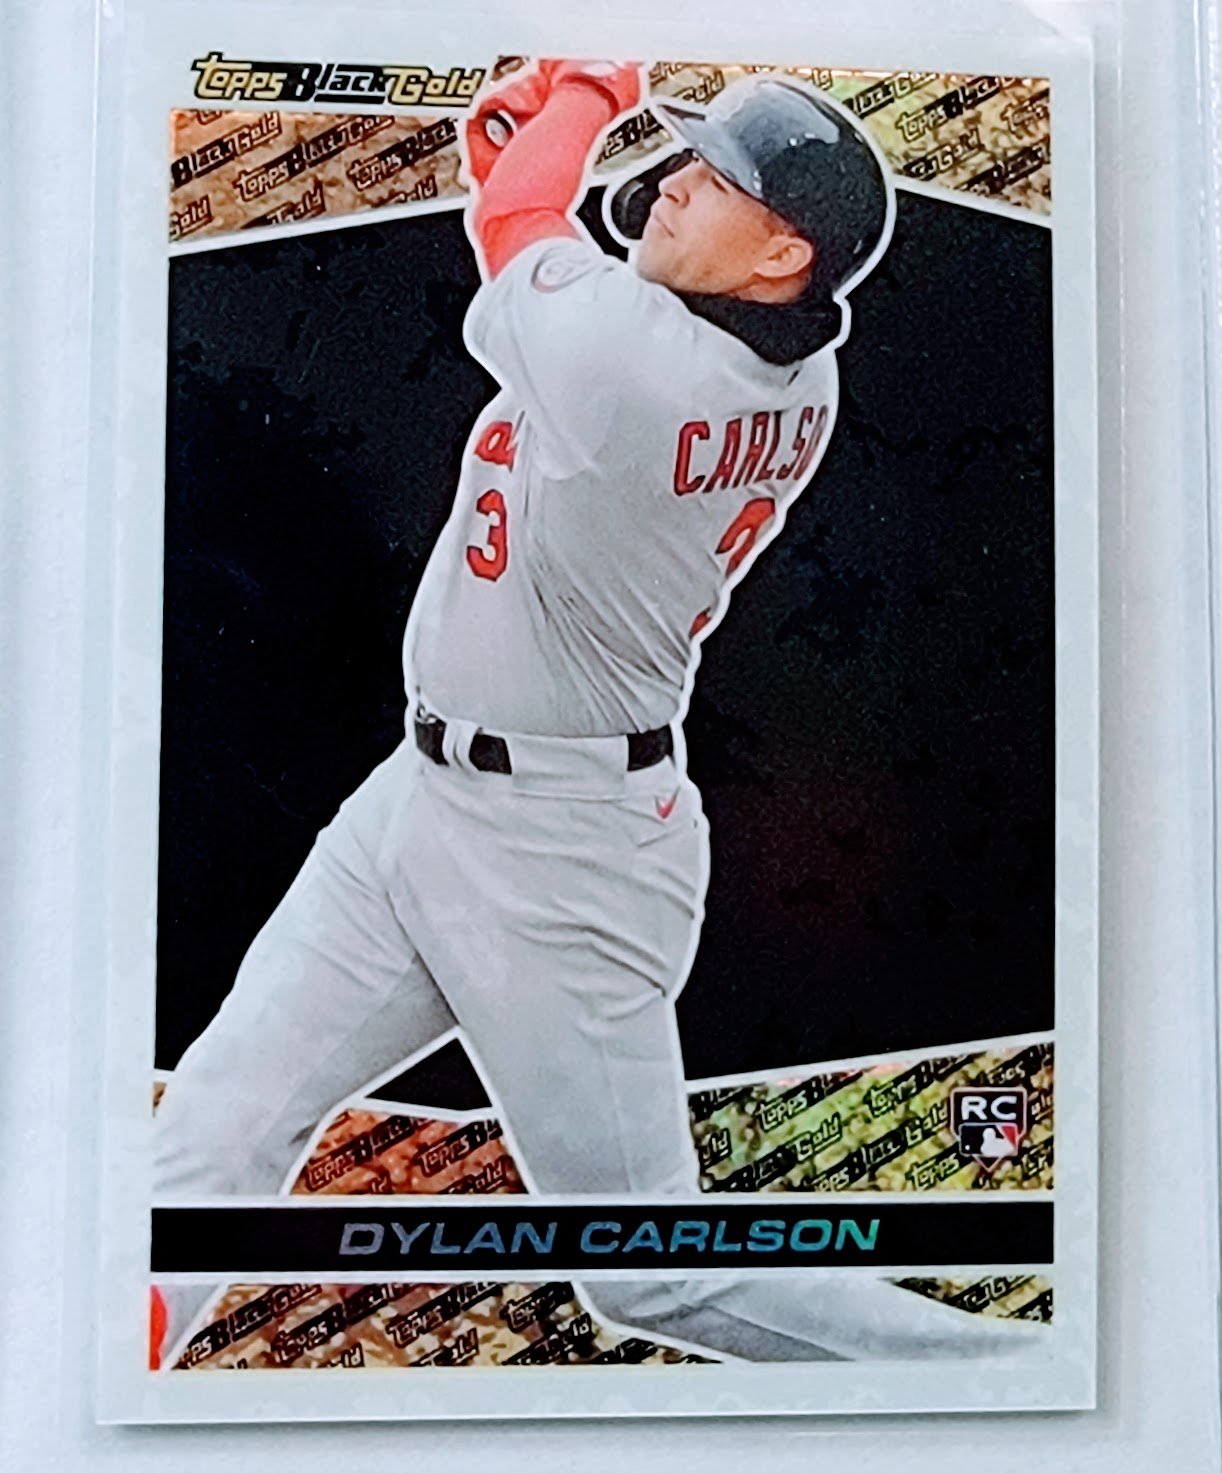 2021 Topps Update Dylan Carlson Black Gold Rookie Baseball Card simple Xclusive Collectibles   